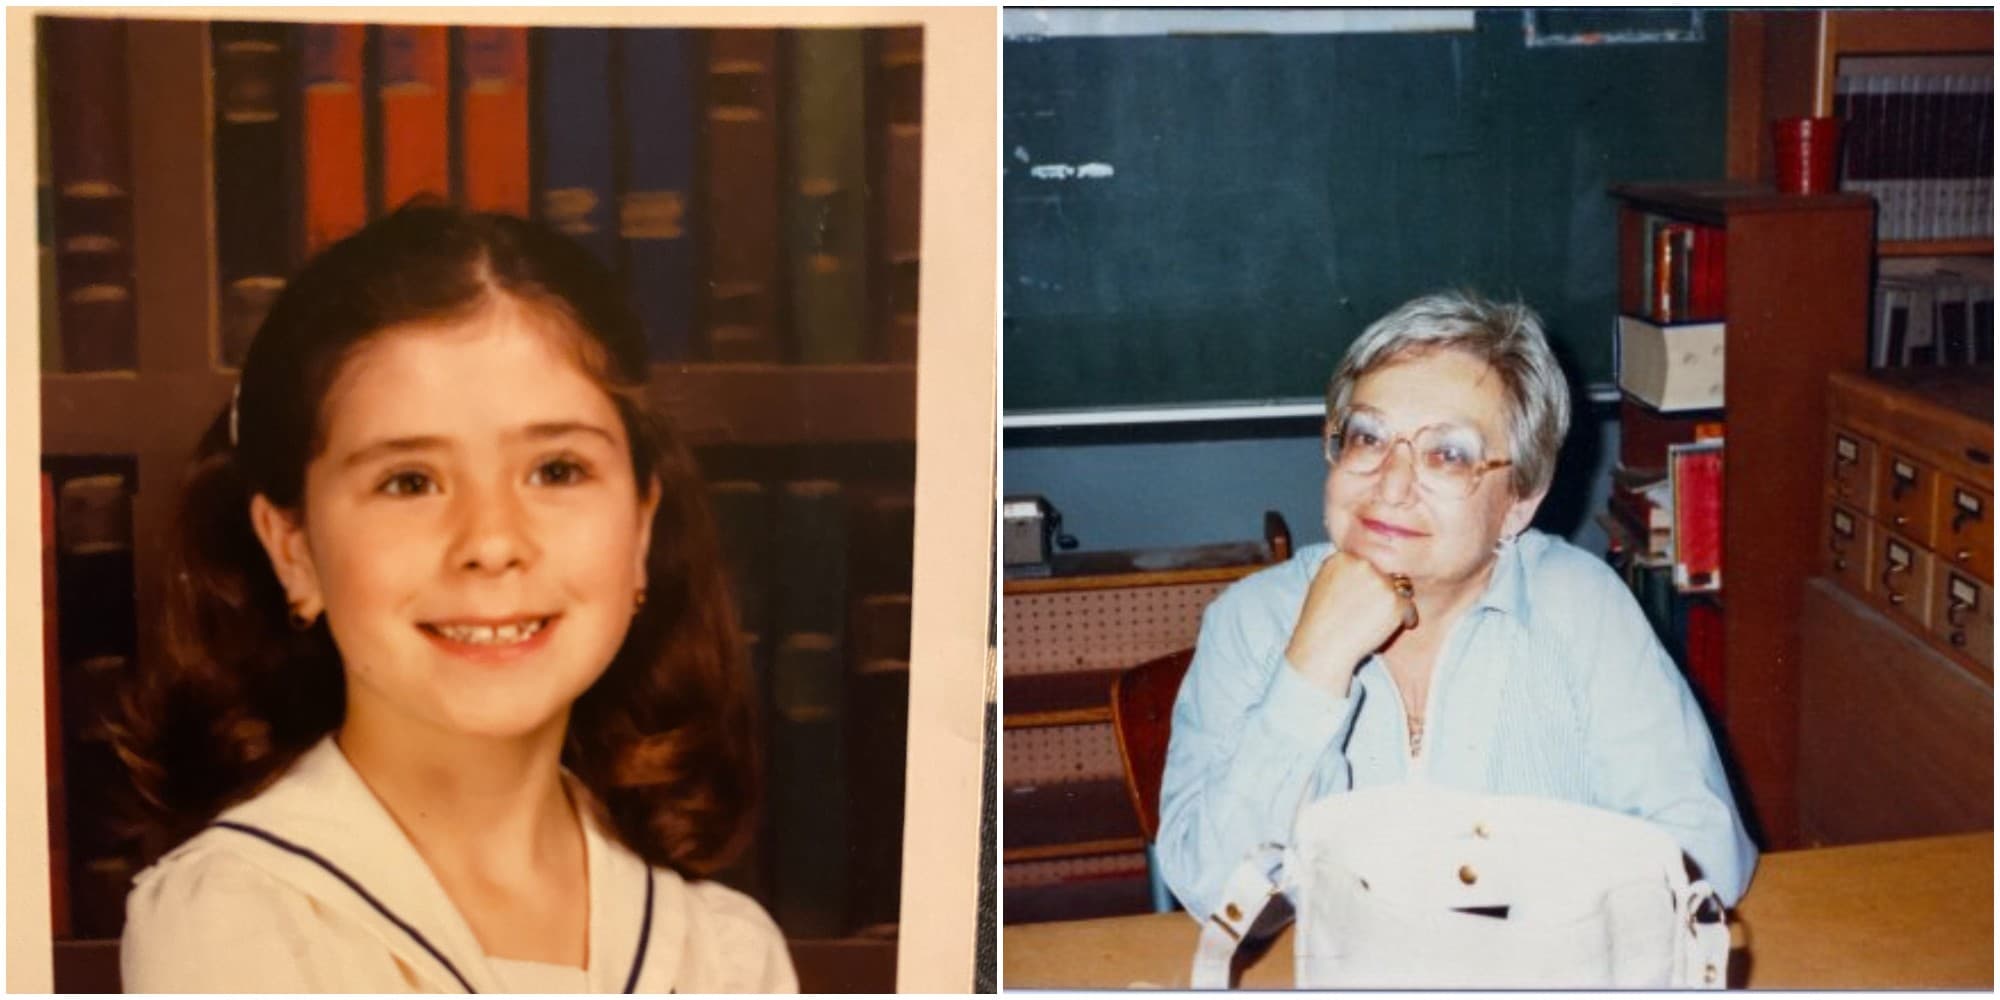 The author, left, as a fifth grader, and her beloved school librarian, Mrs. Ross, who died in 1996. (Courtesy)